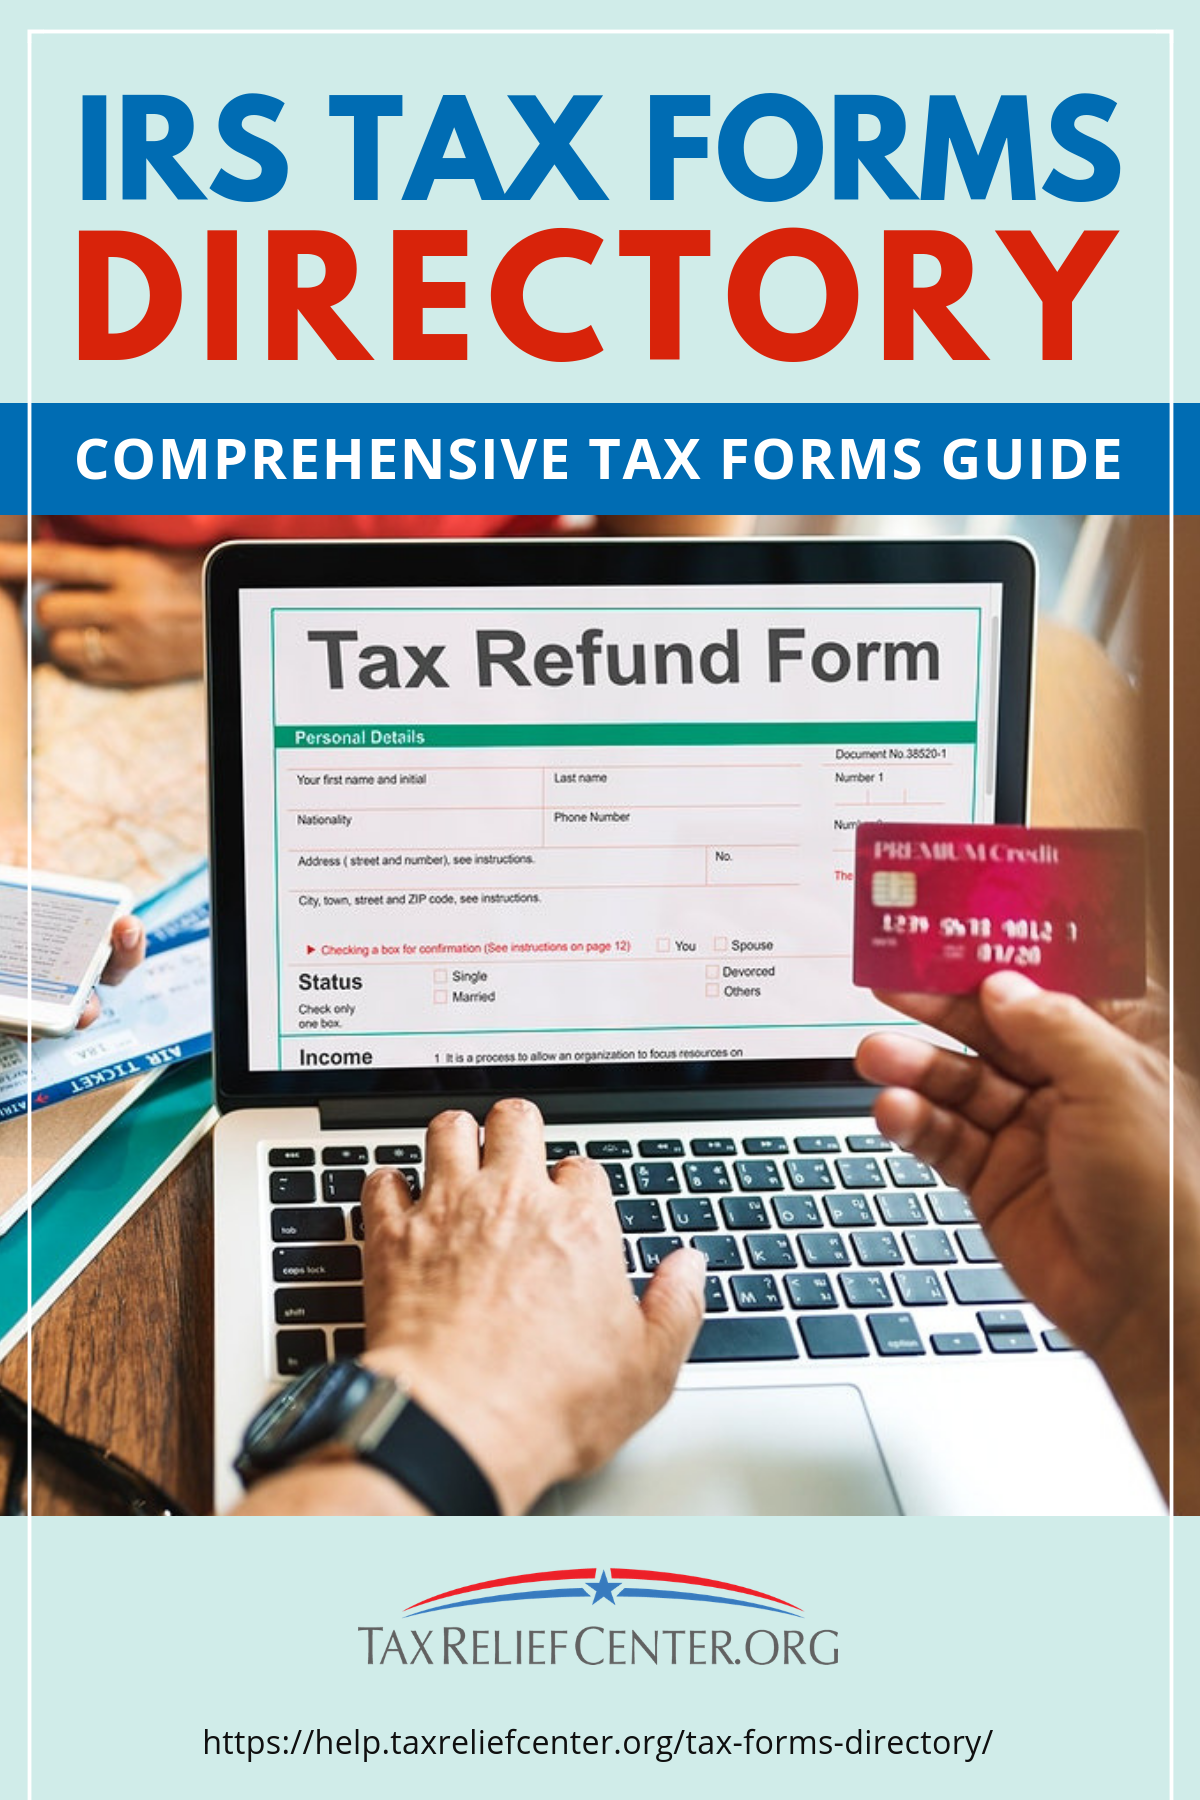 IRS Tax Forms Directory | Comprehensive Tax Forms Guide https://help.taxreliefcenter.org/tax-forms-directory/